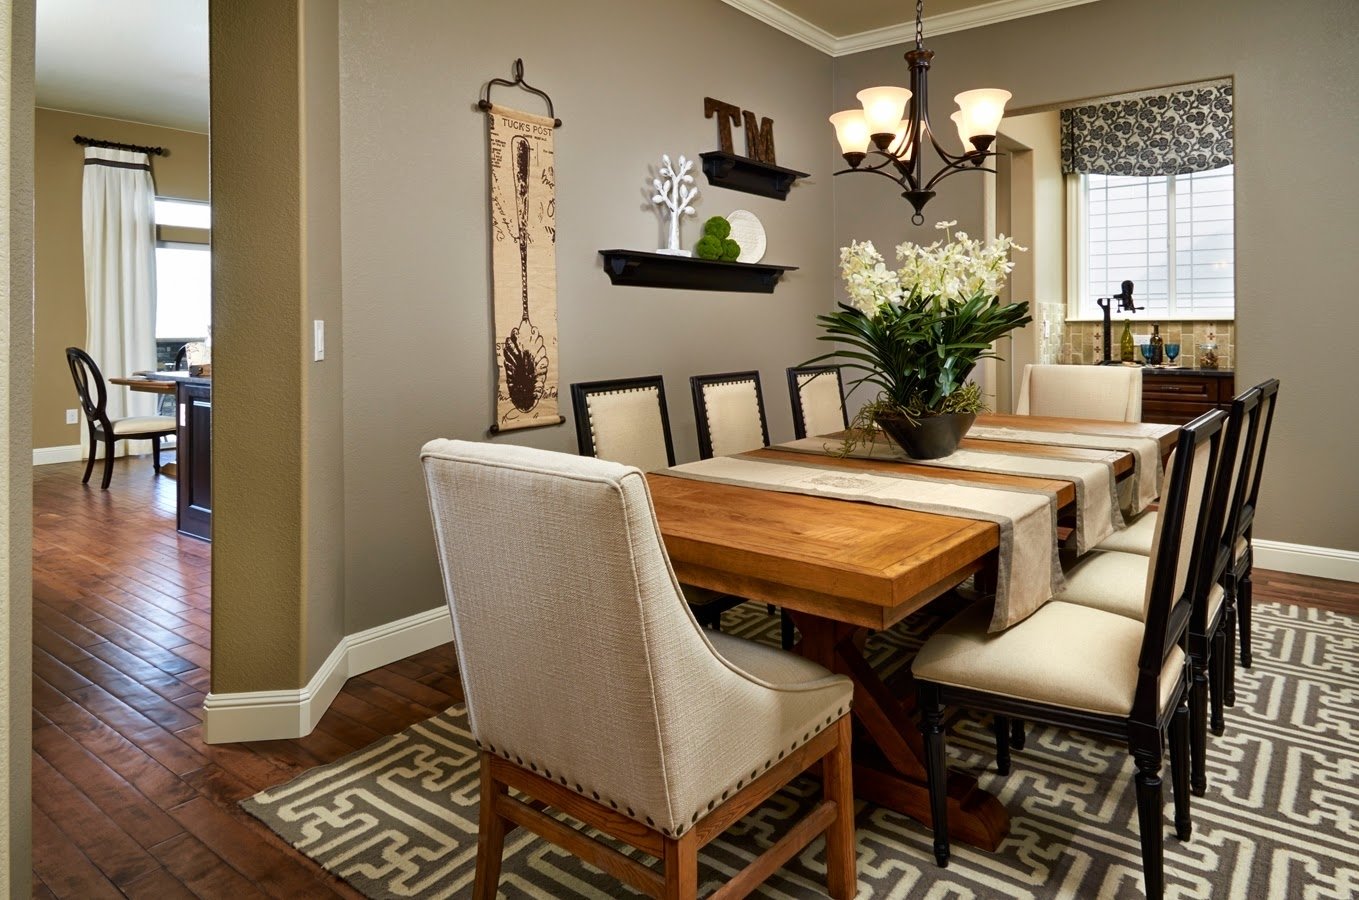 10 Lovable Decorating Ideas For Dining Rooms beauty dining room table decor ideas 52 for your home theater 2022